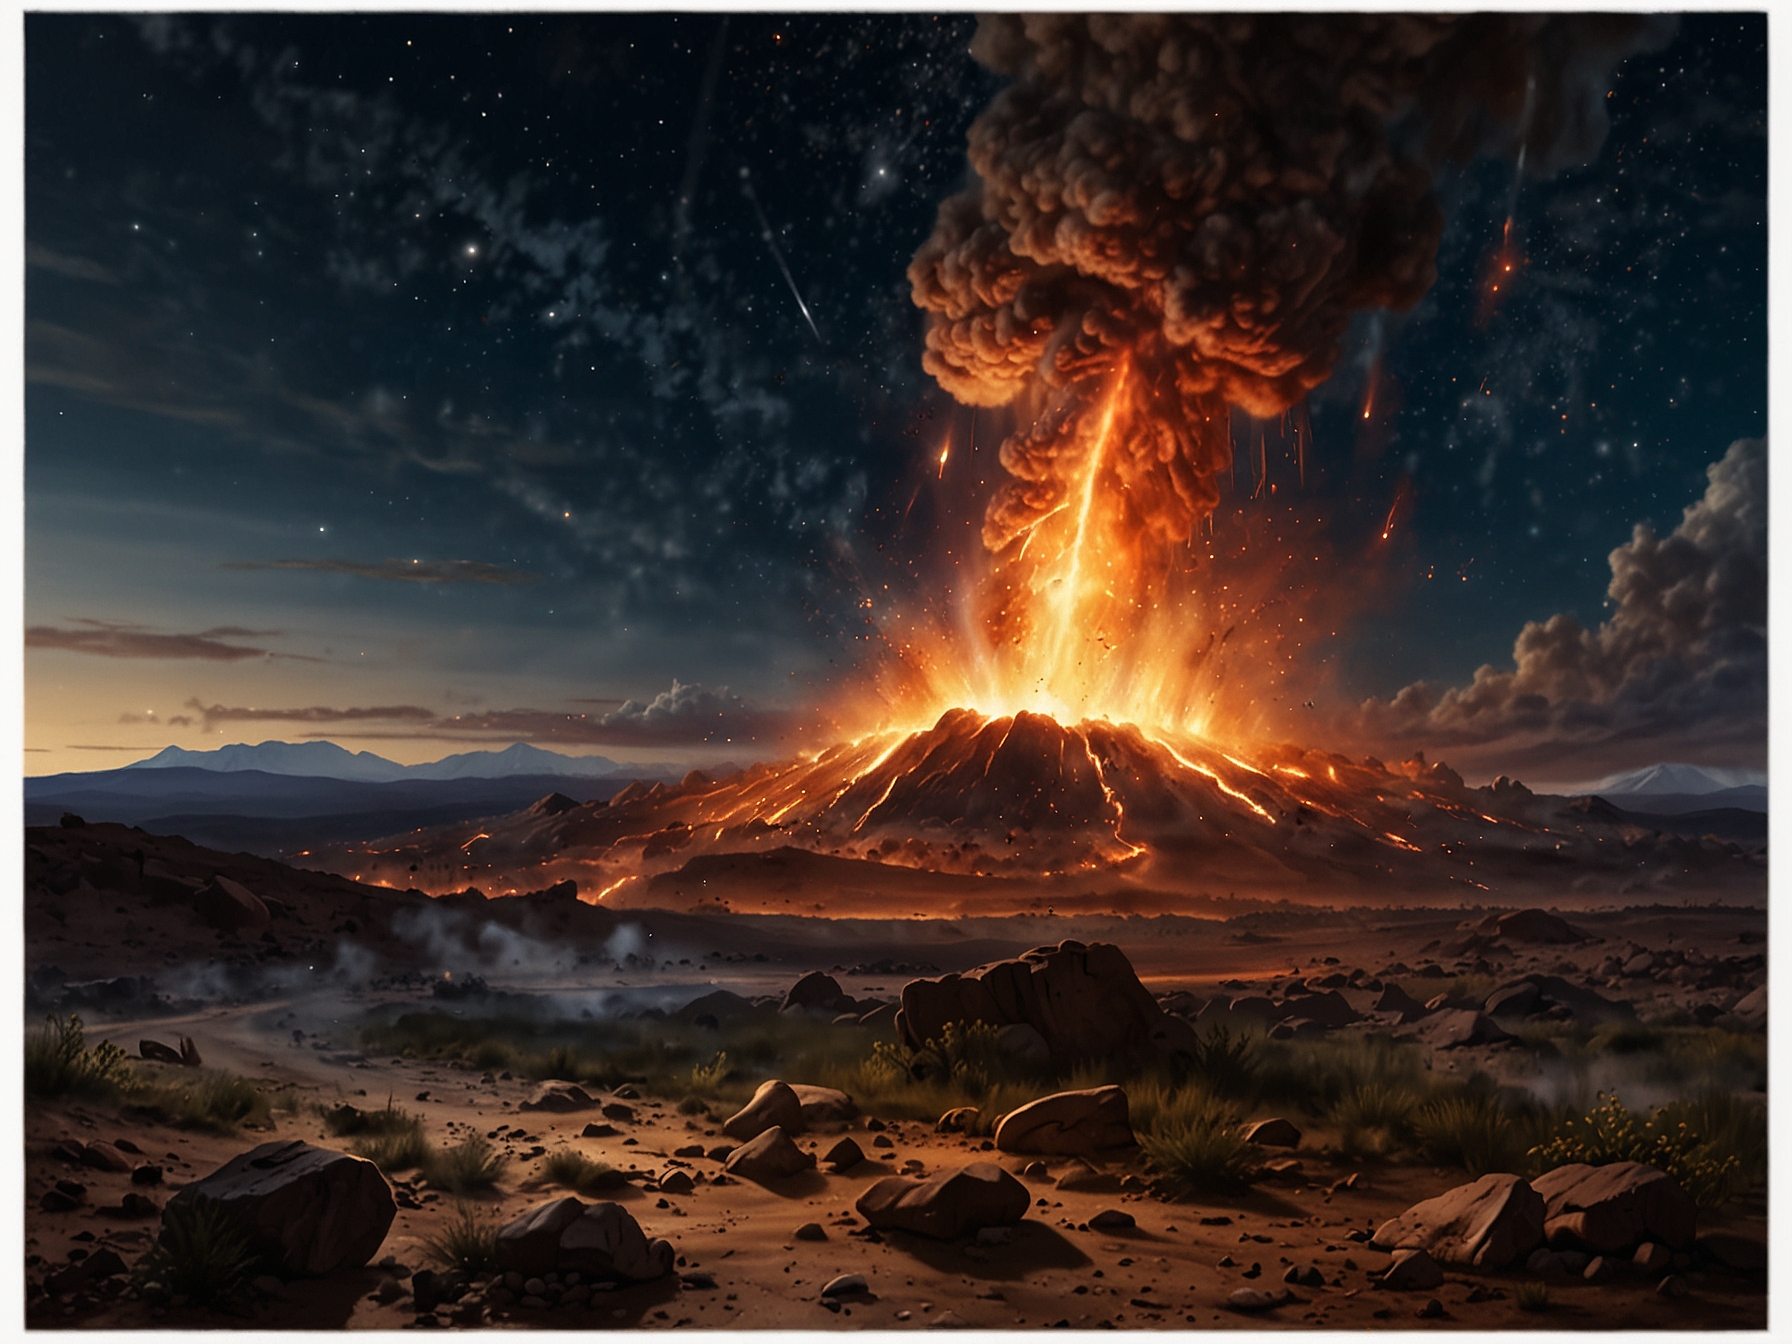 Illustration of a comet airburst 12,800 years ago, scattering debris and igniting wildfires, contributing to sudden climatic changes at the onset of the Younger Dryas period.